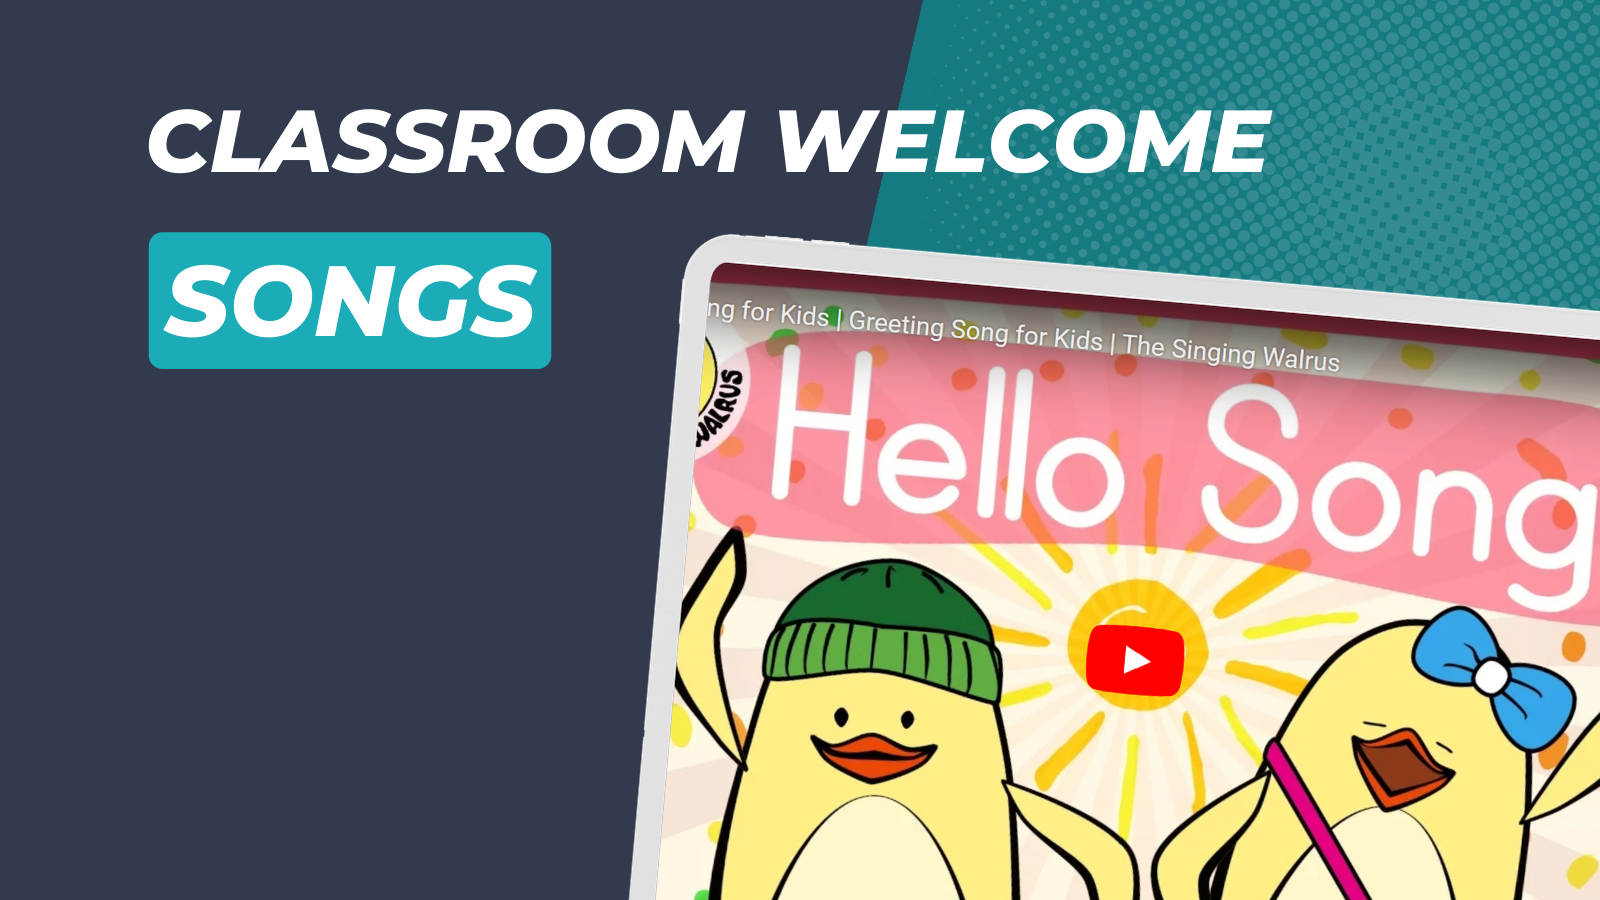 Example of classroom welcome songs as a video on an iPad.